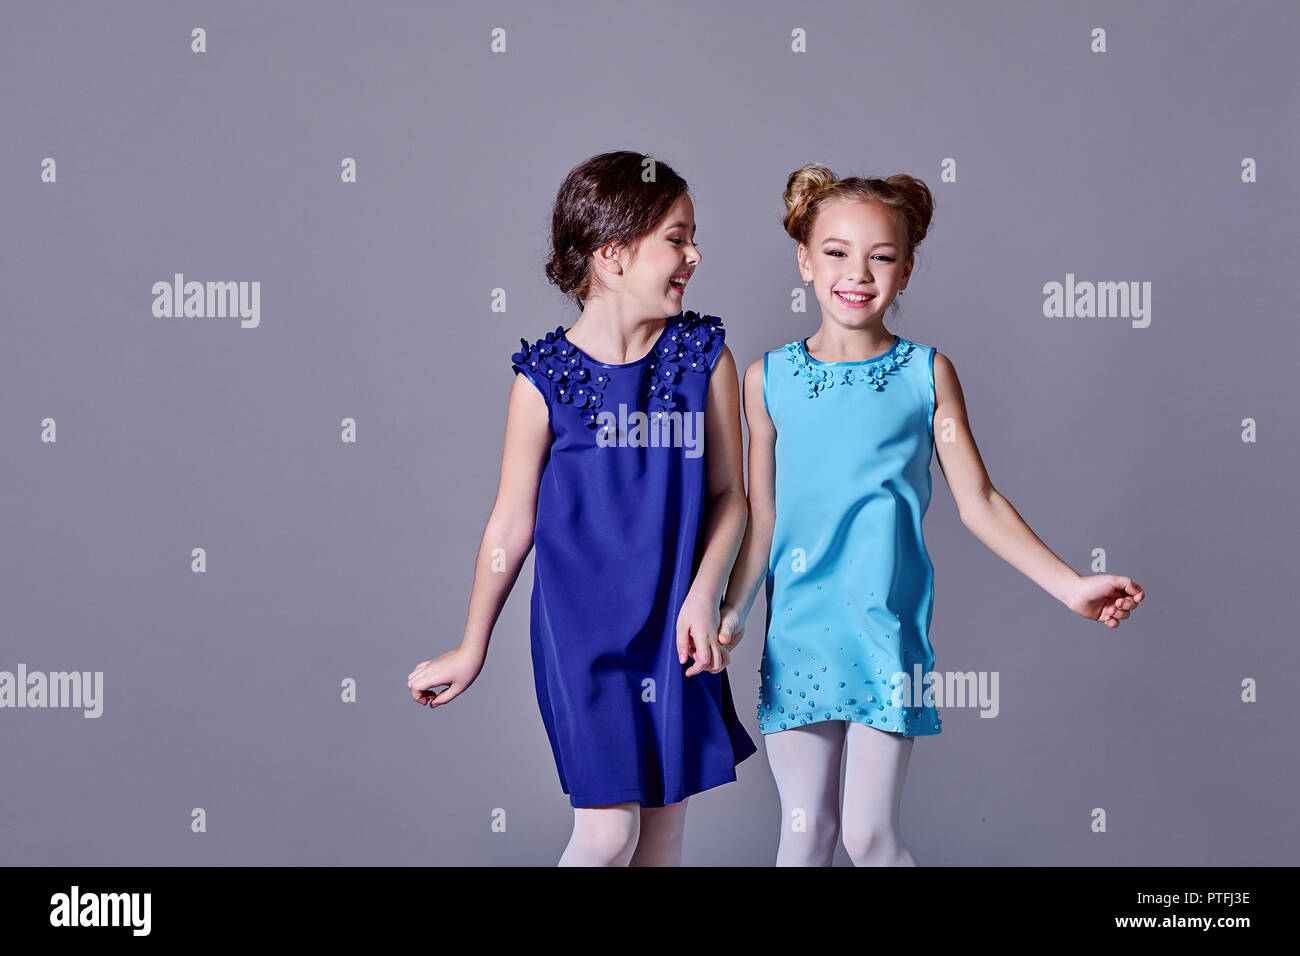 Two 2 little girls having fun in beautiful elegant dresses.Girlfriends fashion model children smile posing studio for catalog designer clothes. Classic lady style for kids, teens. copy space. Stock Photo